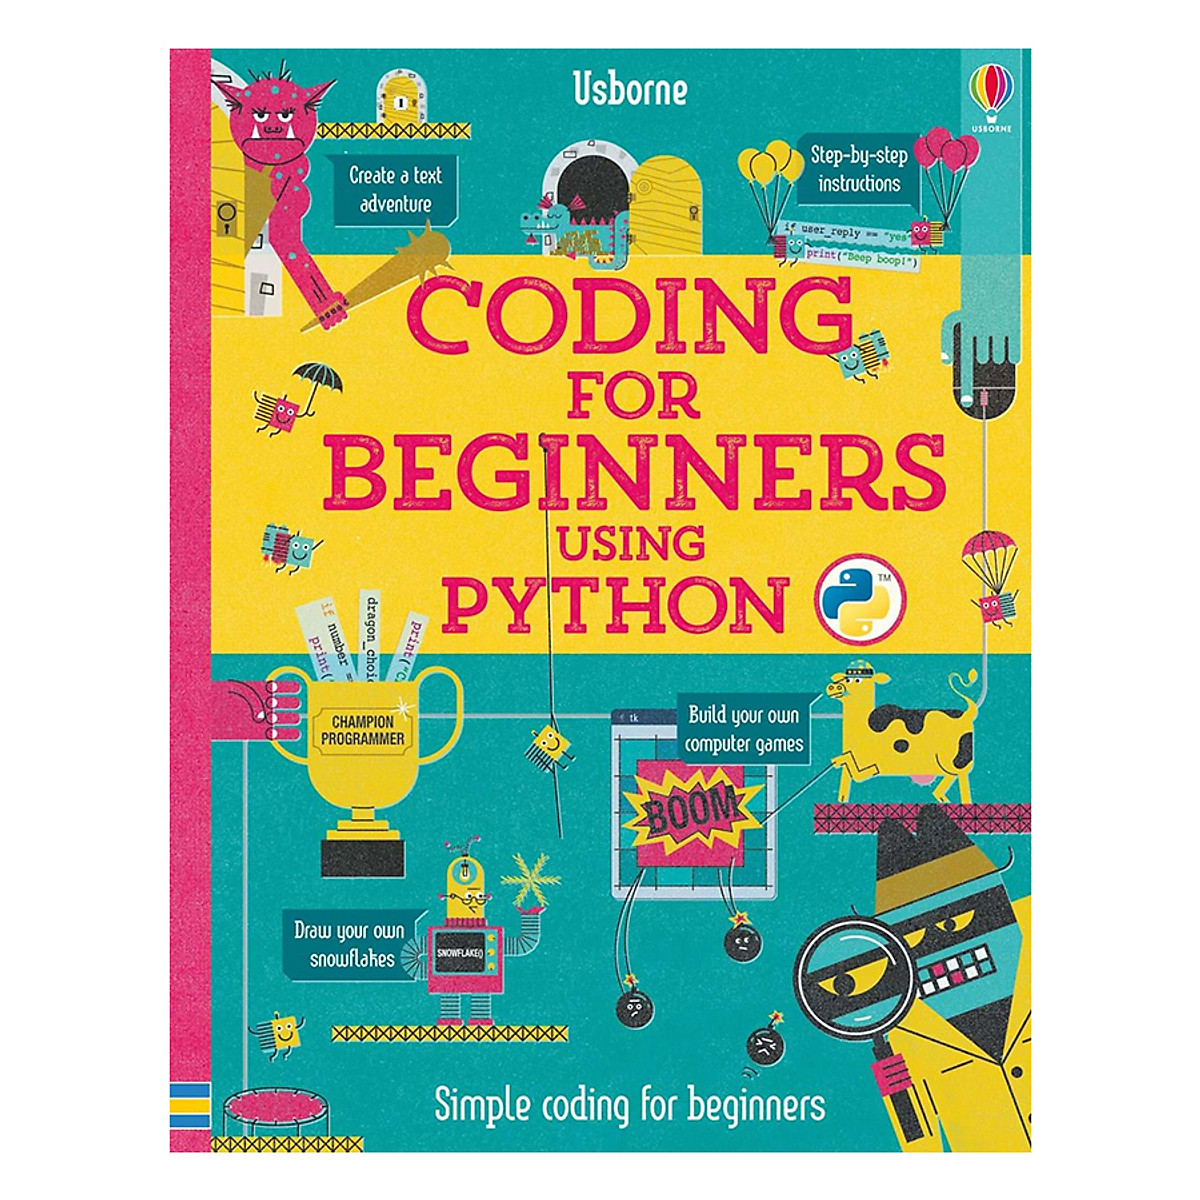 Sách tiếng Anh - Usborne Coding for Beginners using Python